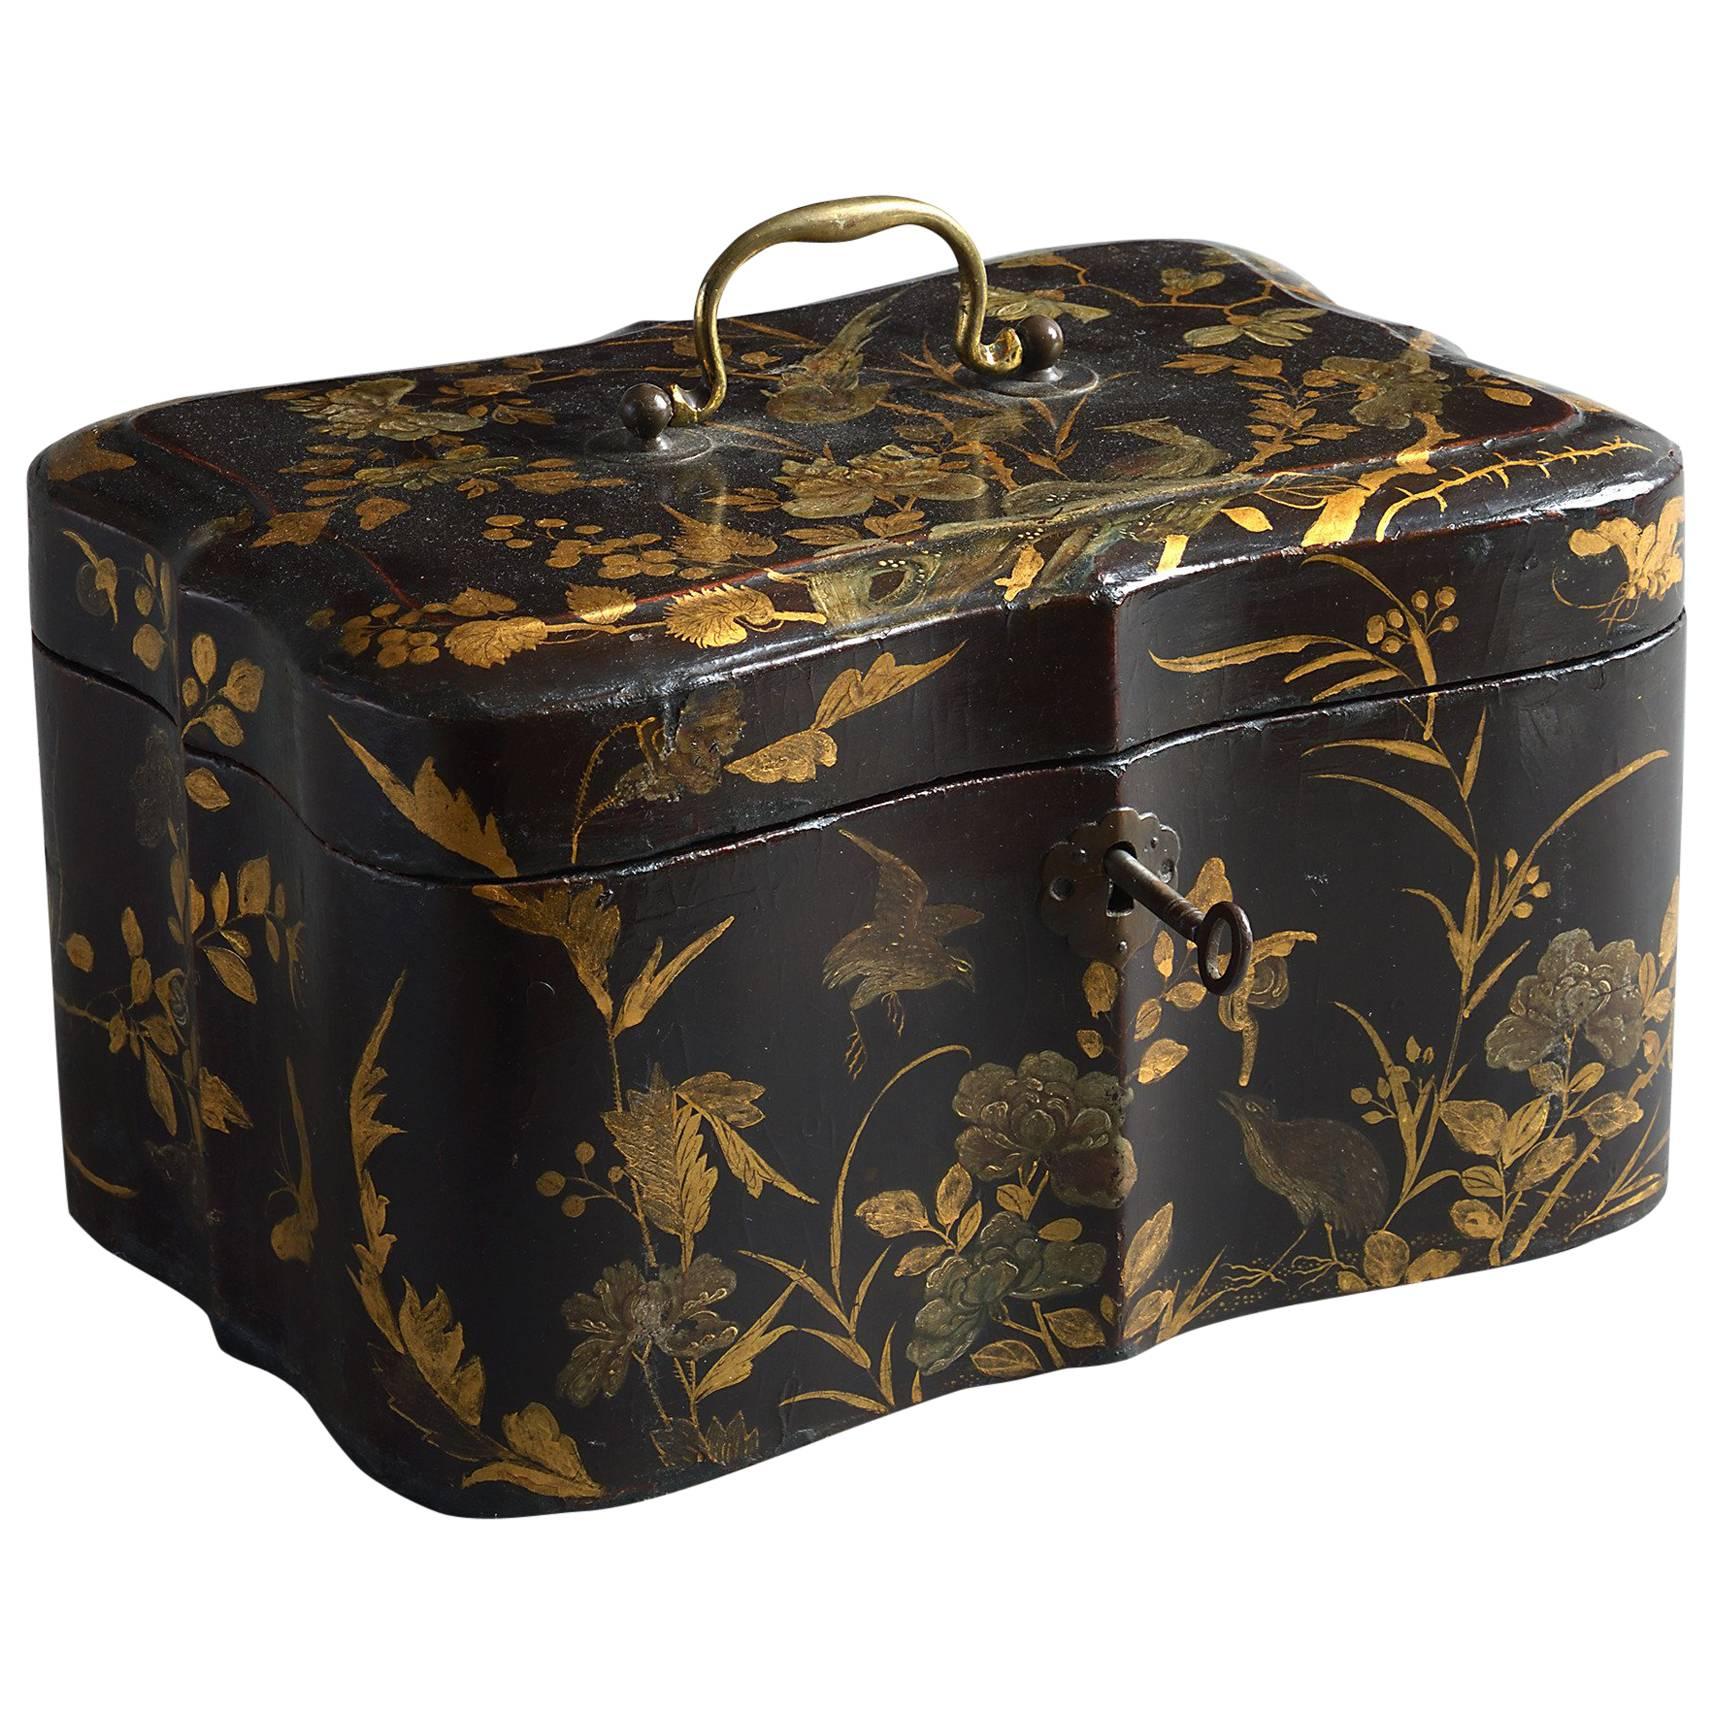 18th Century Chinese Export Black Lacquer Casket